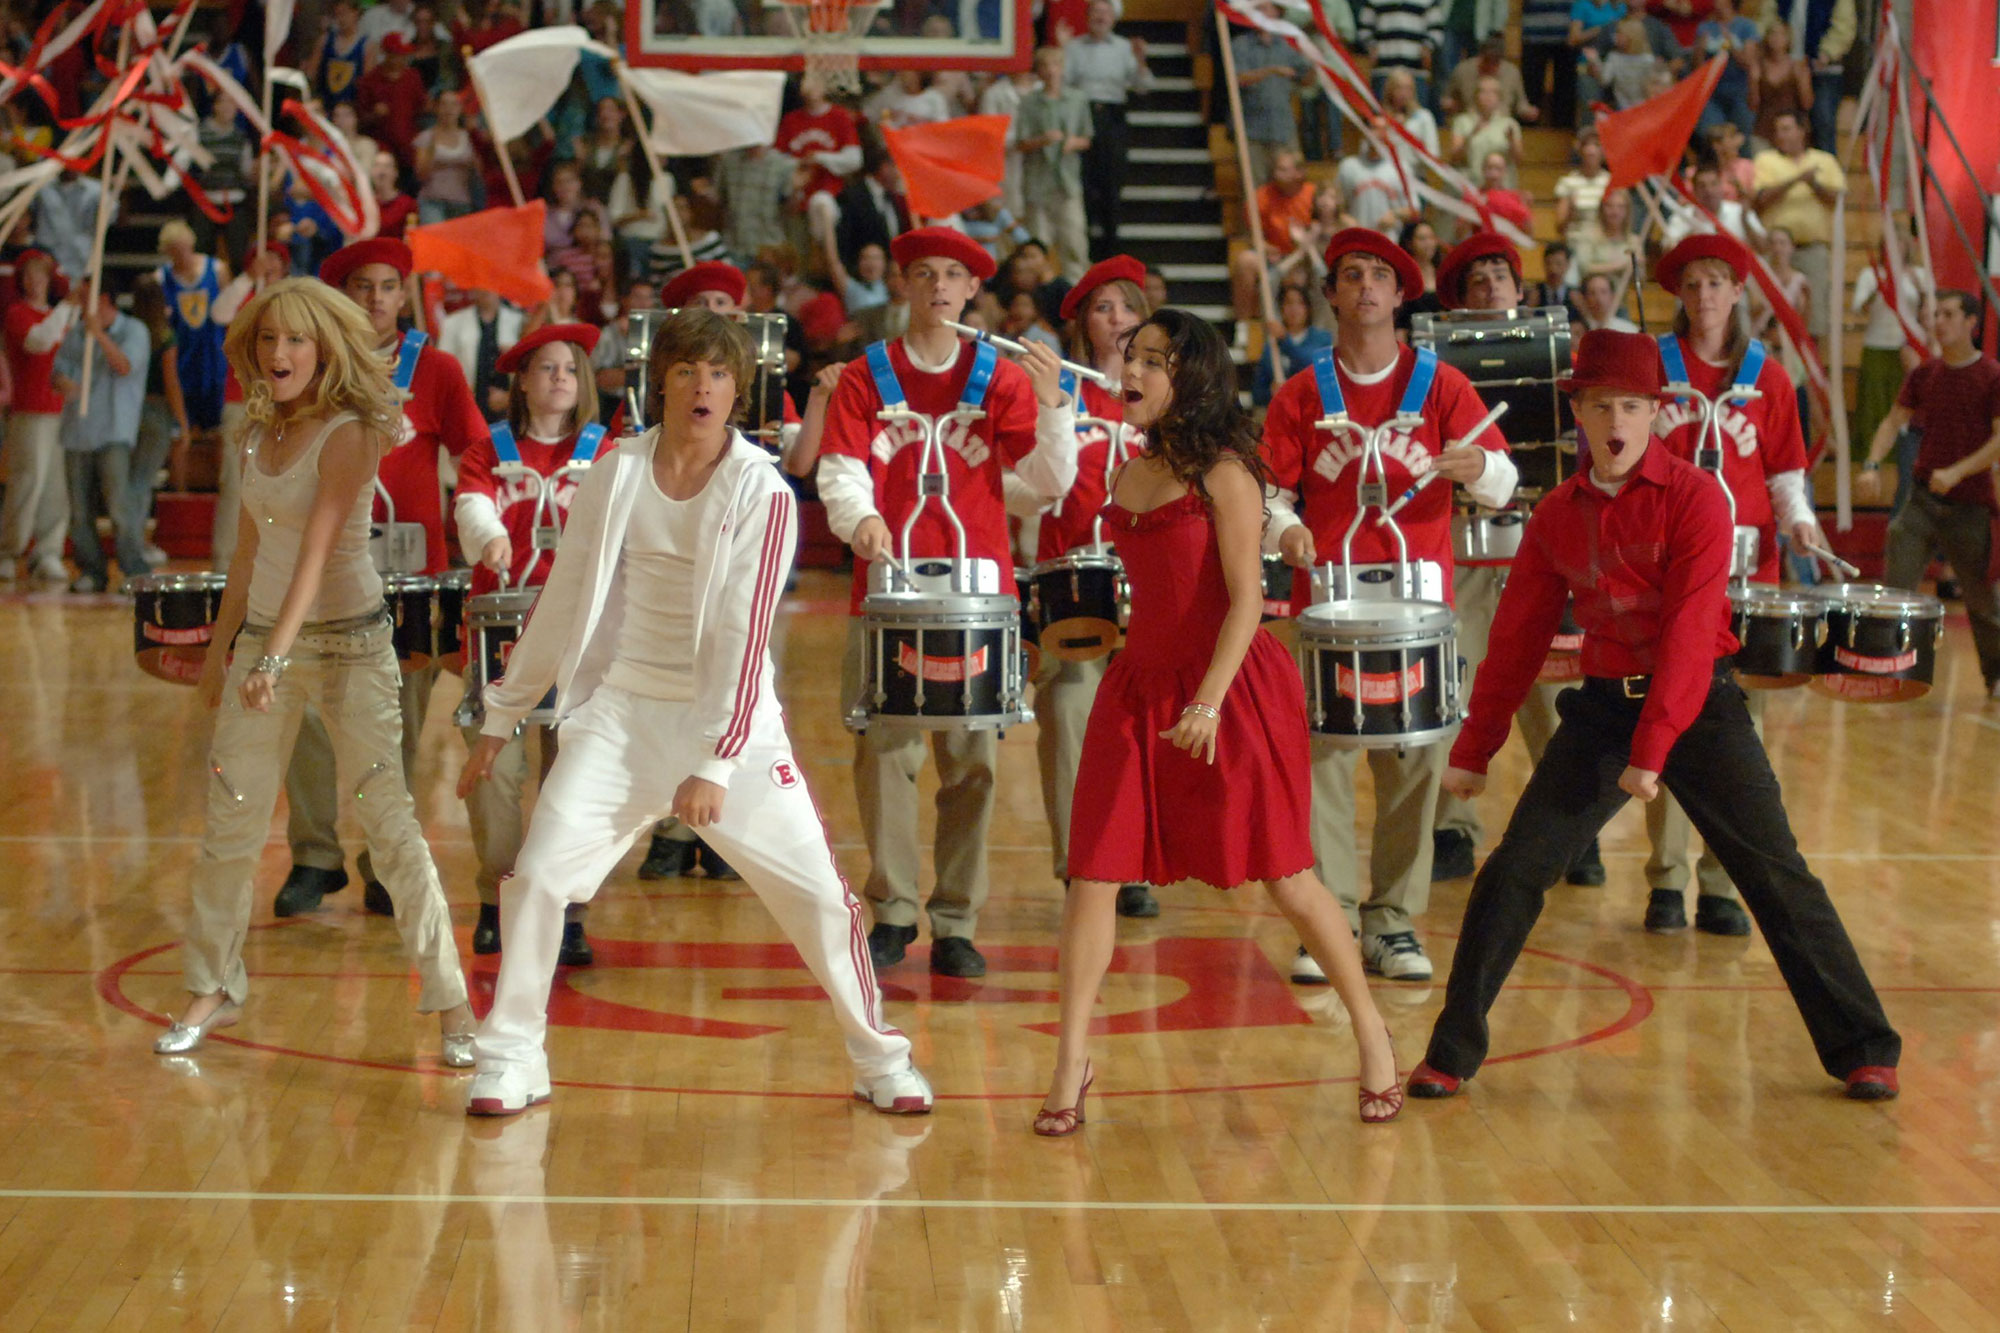 Get in Shape with this High School Musical Cardio Workout from Home